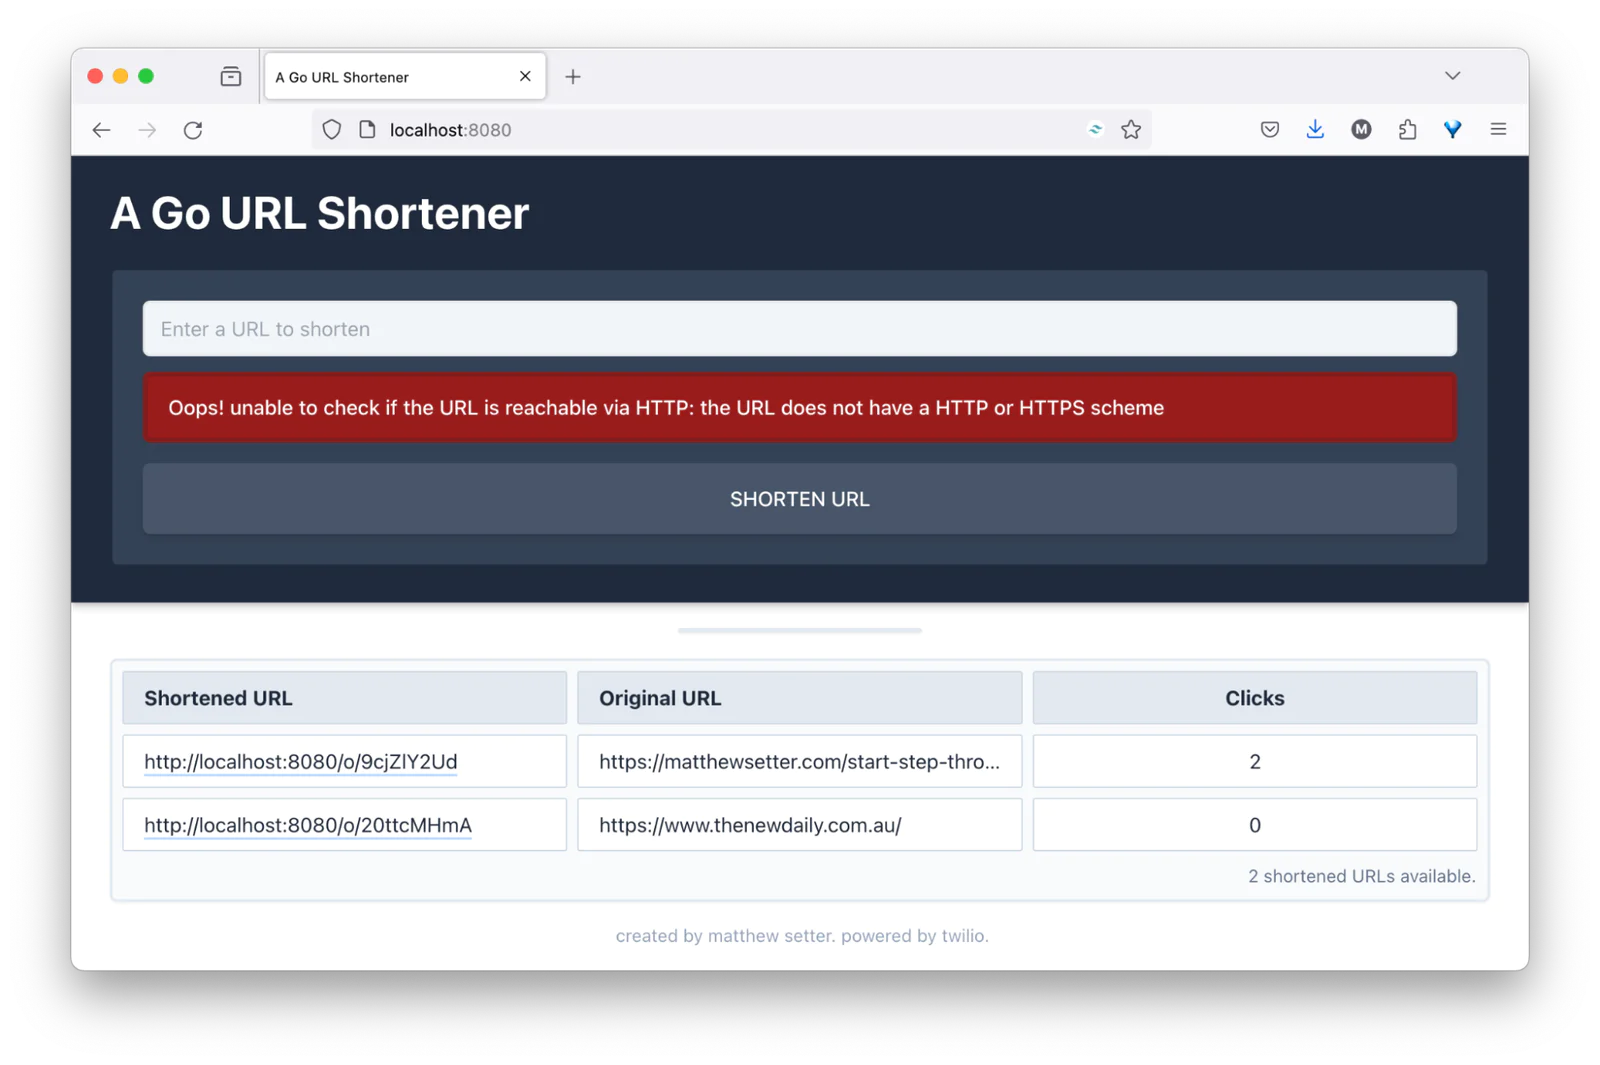 The default page of the URL shortener. The form to shorten URLs is at the top of page, with an error message displayed. A table of two shortened URLs is underneath